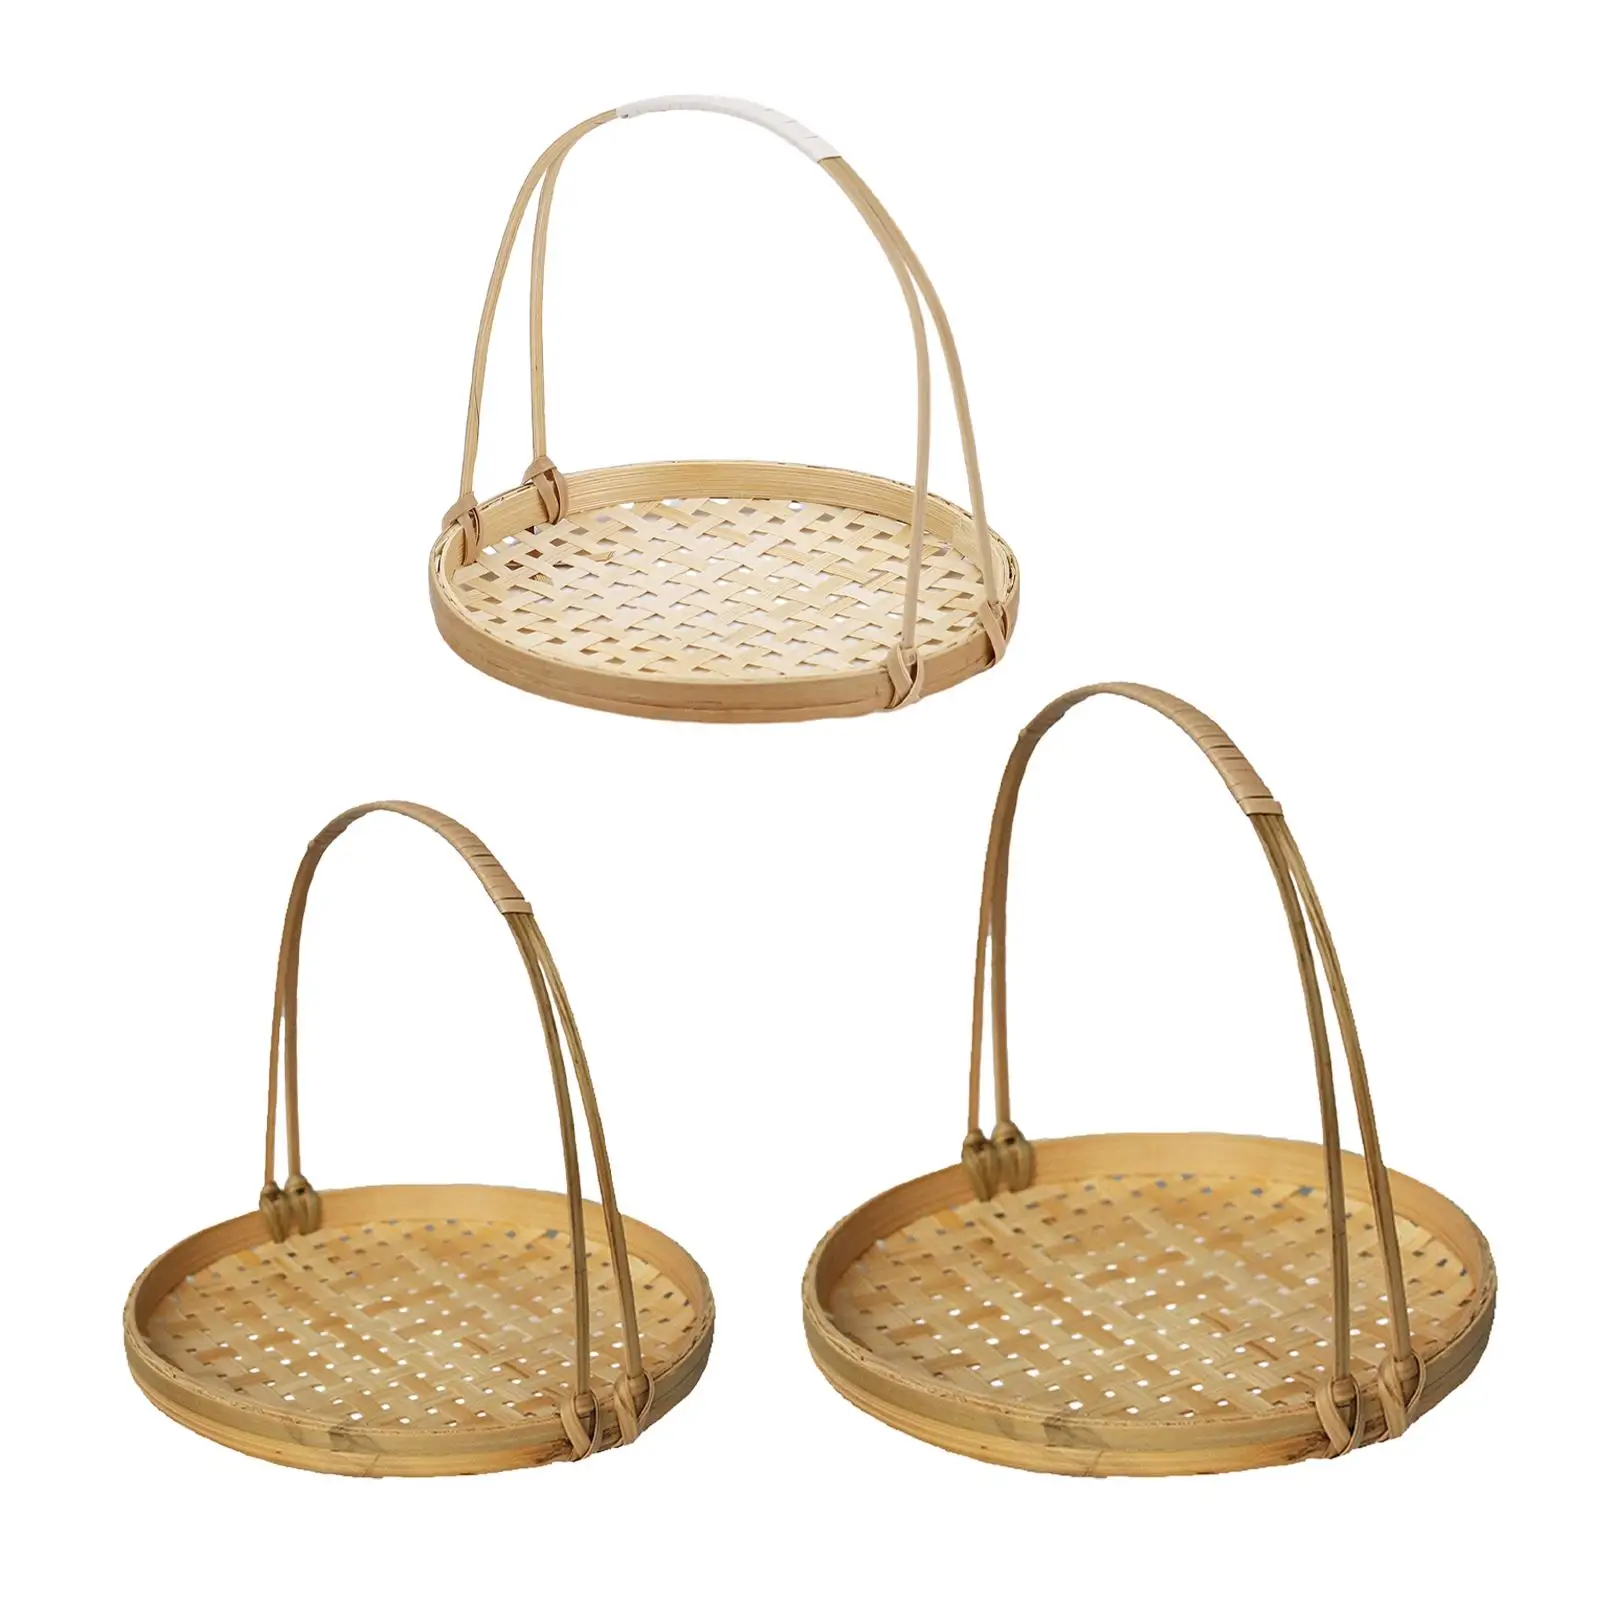 Hand Woven Fruit Basket Rattan Farmhosue Decoration with Handles Ottoman Trays Food Storage for Dining Room Picnics Home Table